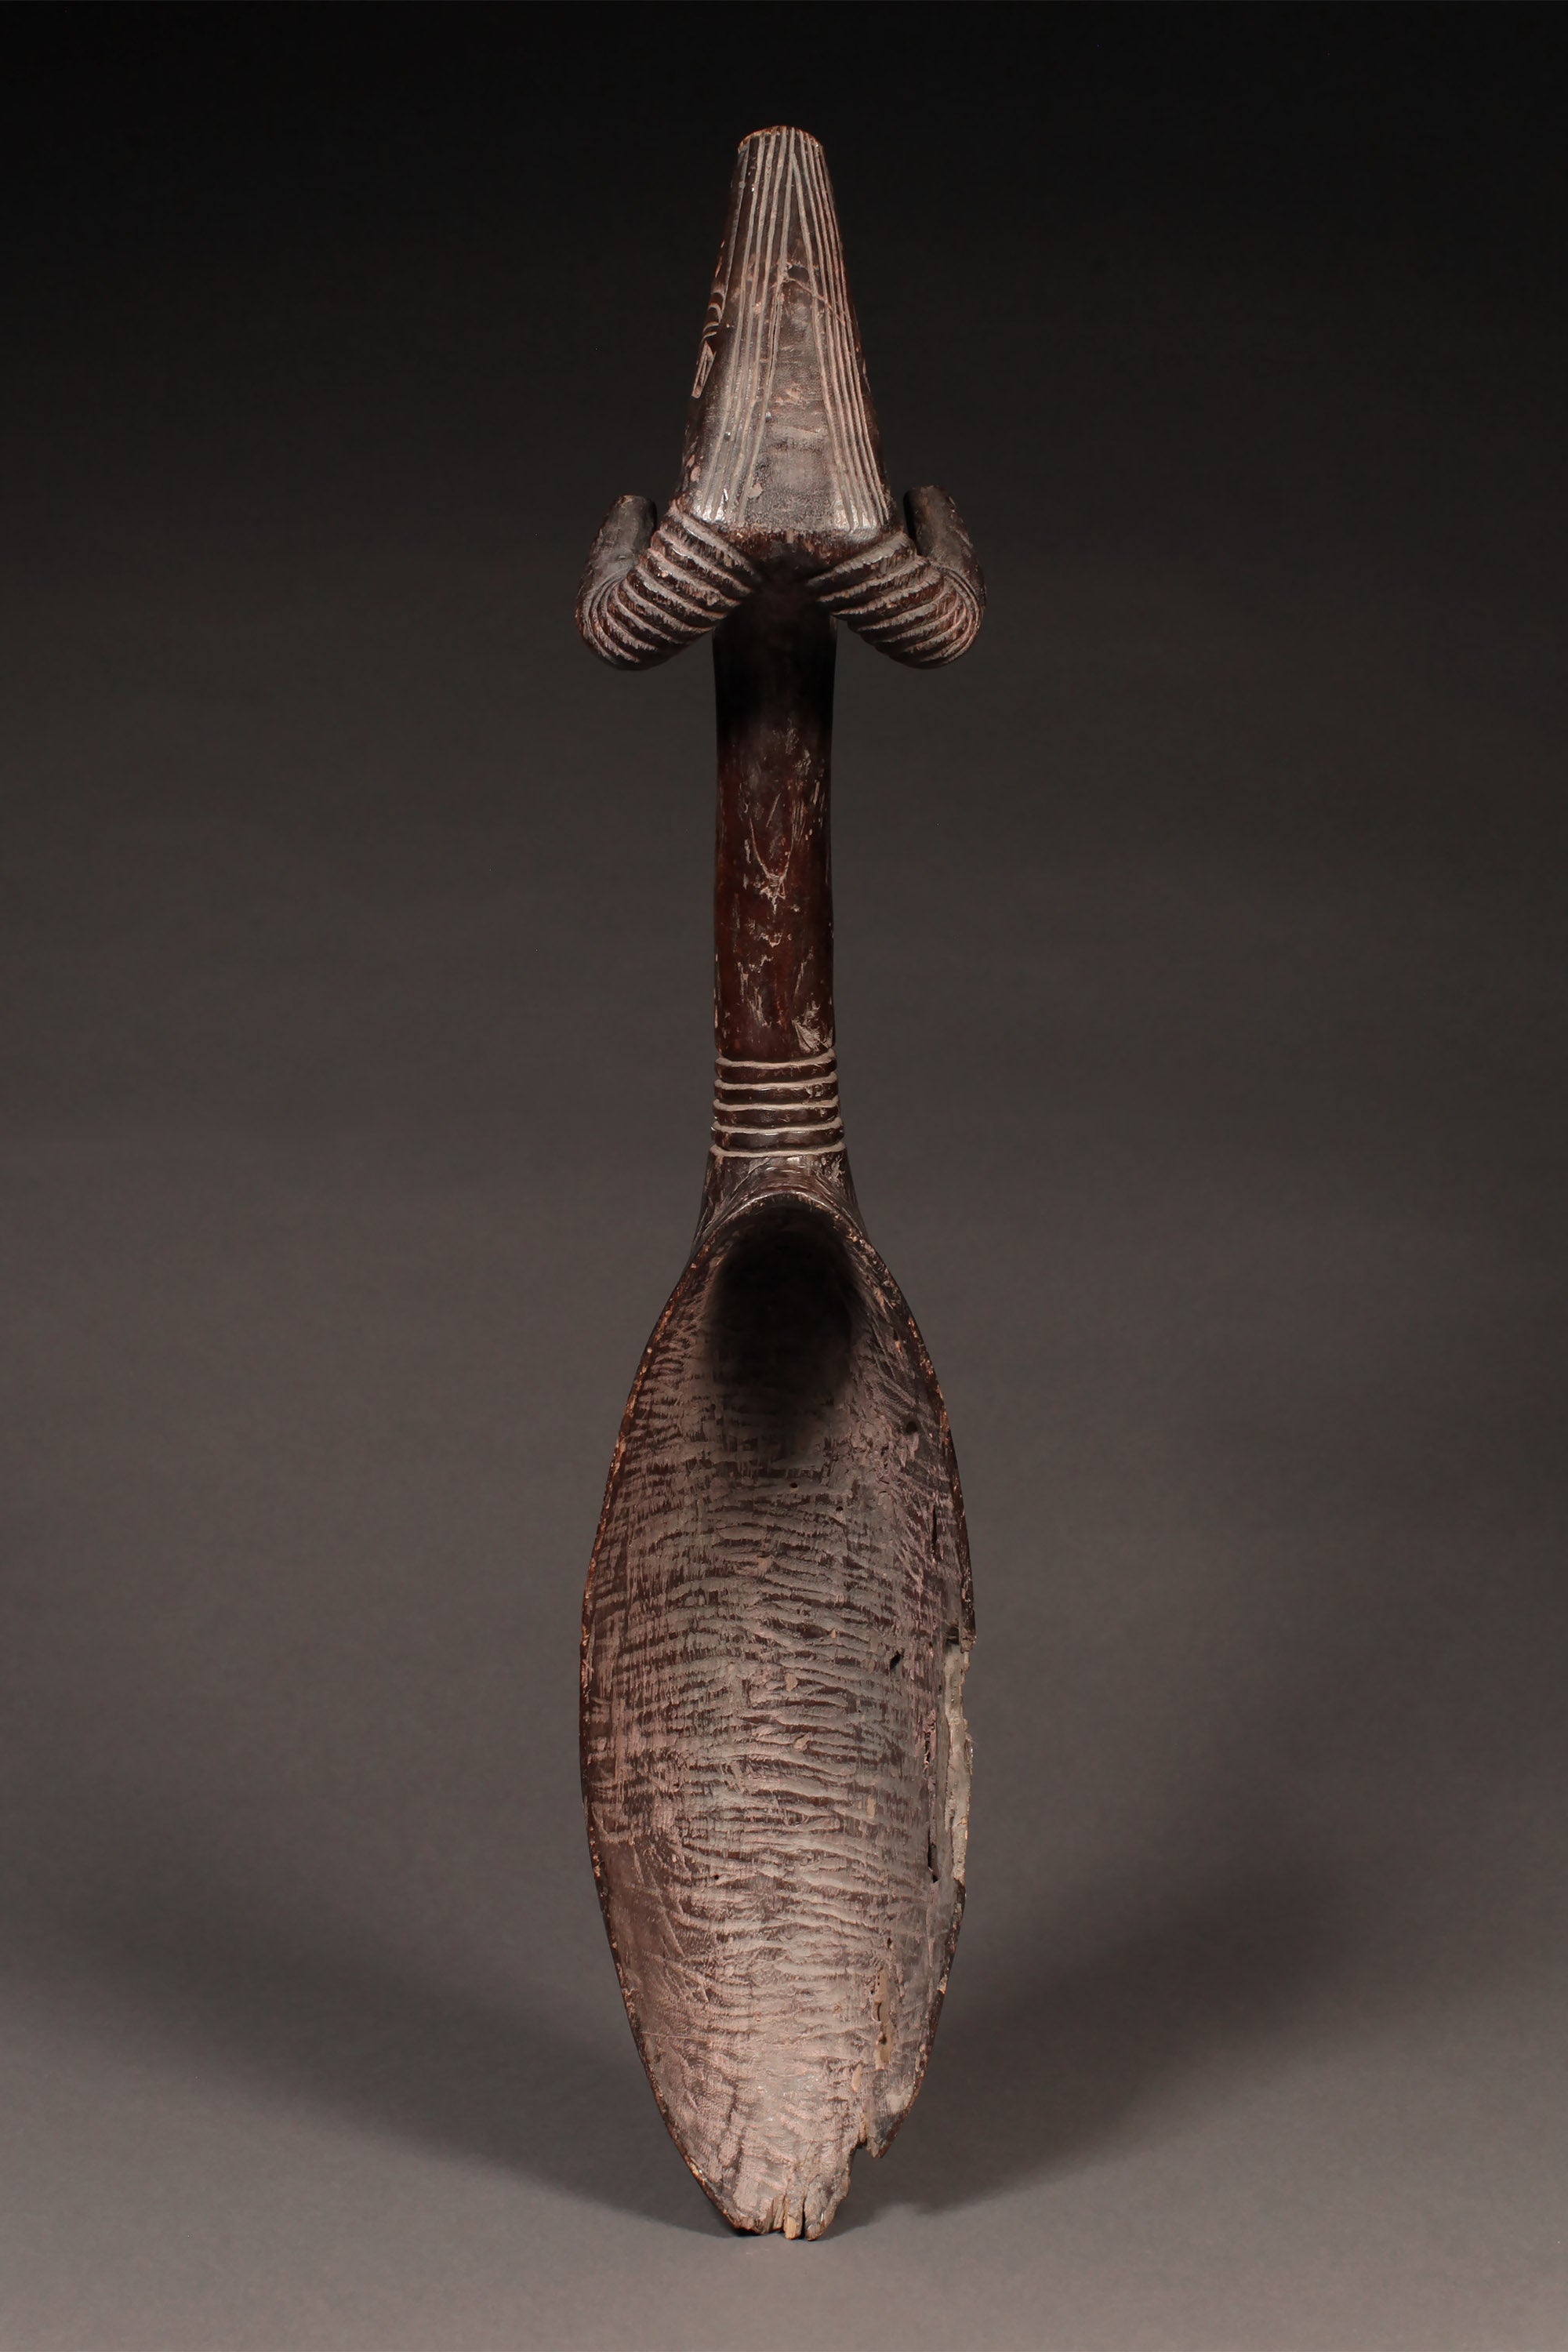 Tribal Objects - African Tribal Art - Ancient Ceremonial Art - Handcrafted Artifacts - Masks - Wood Sculptures - Iron Bronze Objects - Textiles - Art Pieces - African Folk Art - This rare and authentic Ceremonial Ladle Spoon from the Dan Tribe is carved from wood from the Ivory Coast and Liberia. It features a Ram's Head on the handle and is estimated to be very old. A true collector's item, perfect for those looking for an extraordinary cultural piece. 30